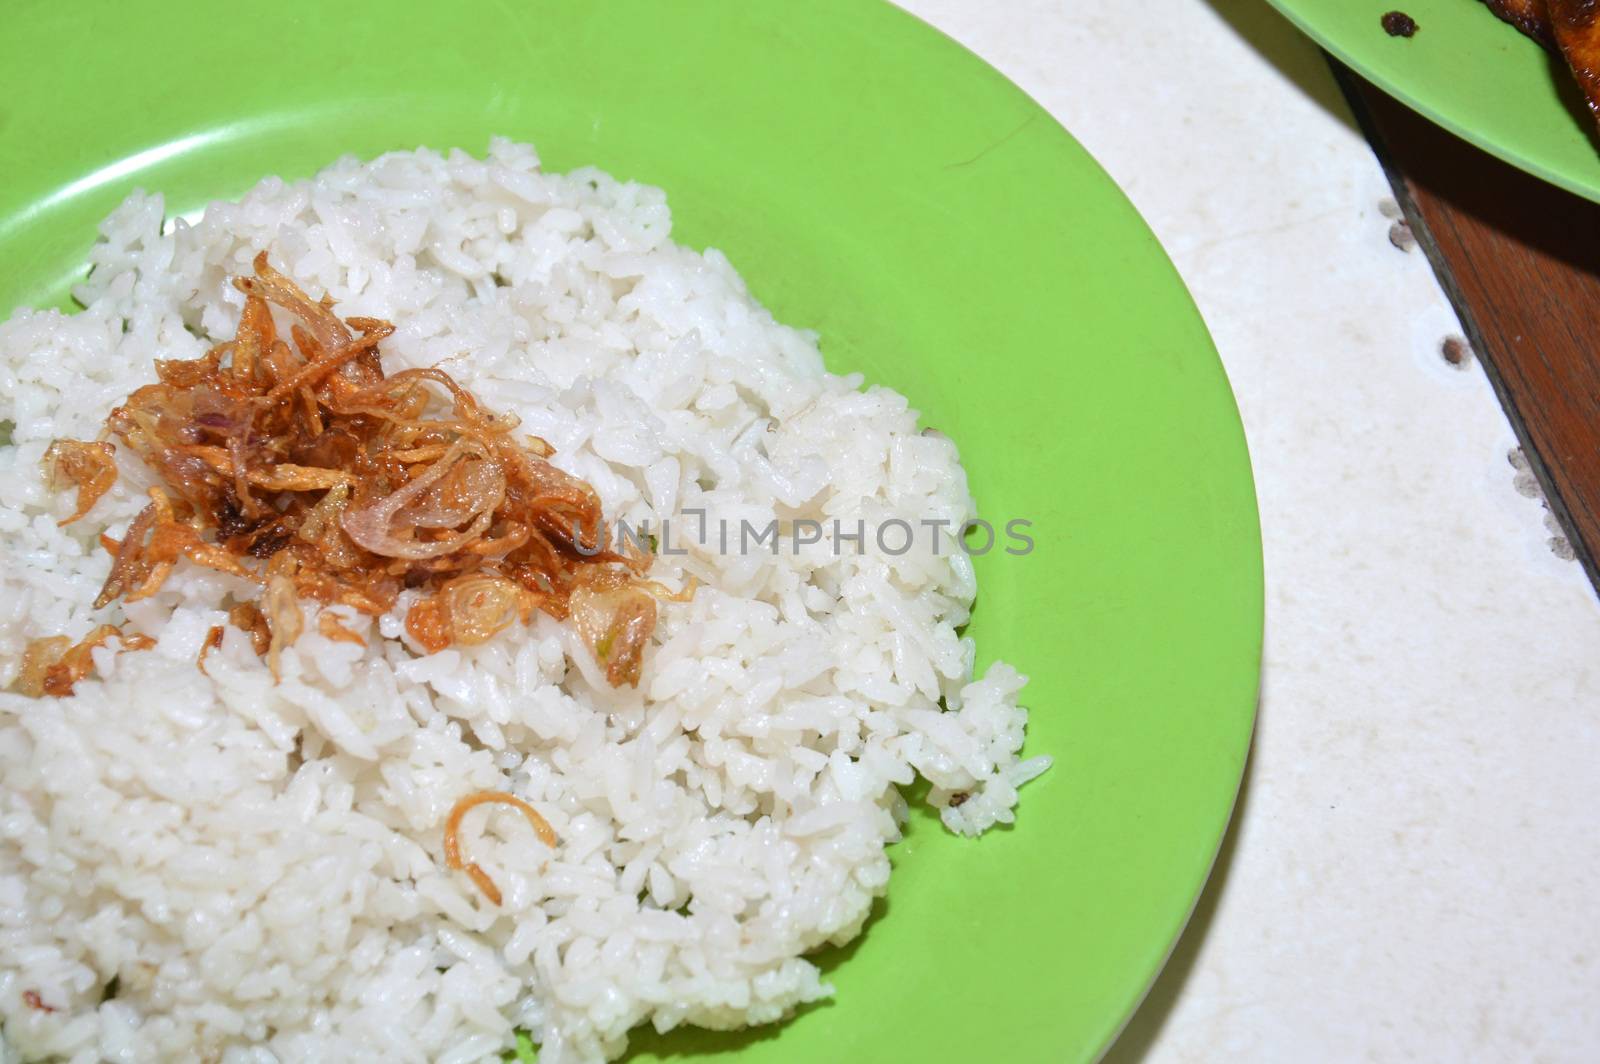 nasi uduk, Indonesian traditional food, which is rice boiled in coconut milk